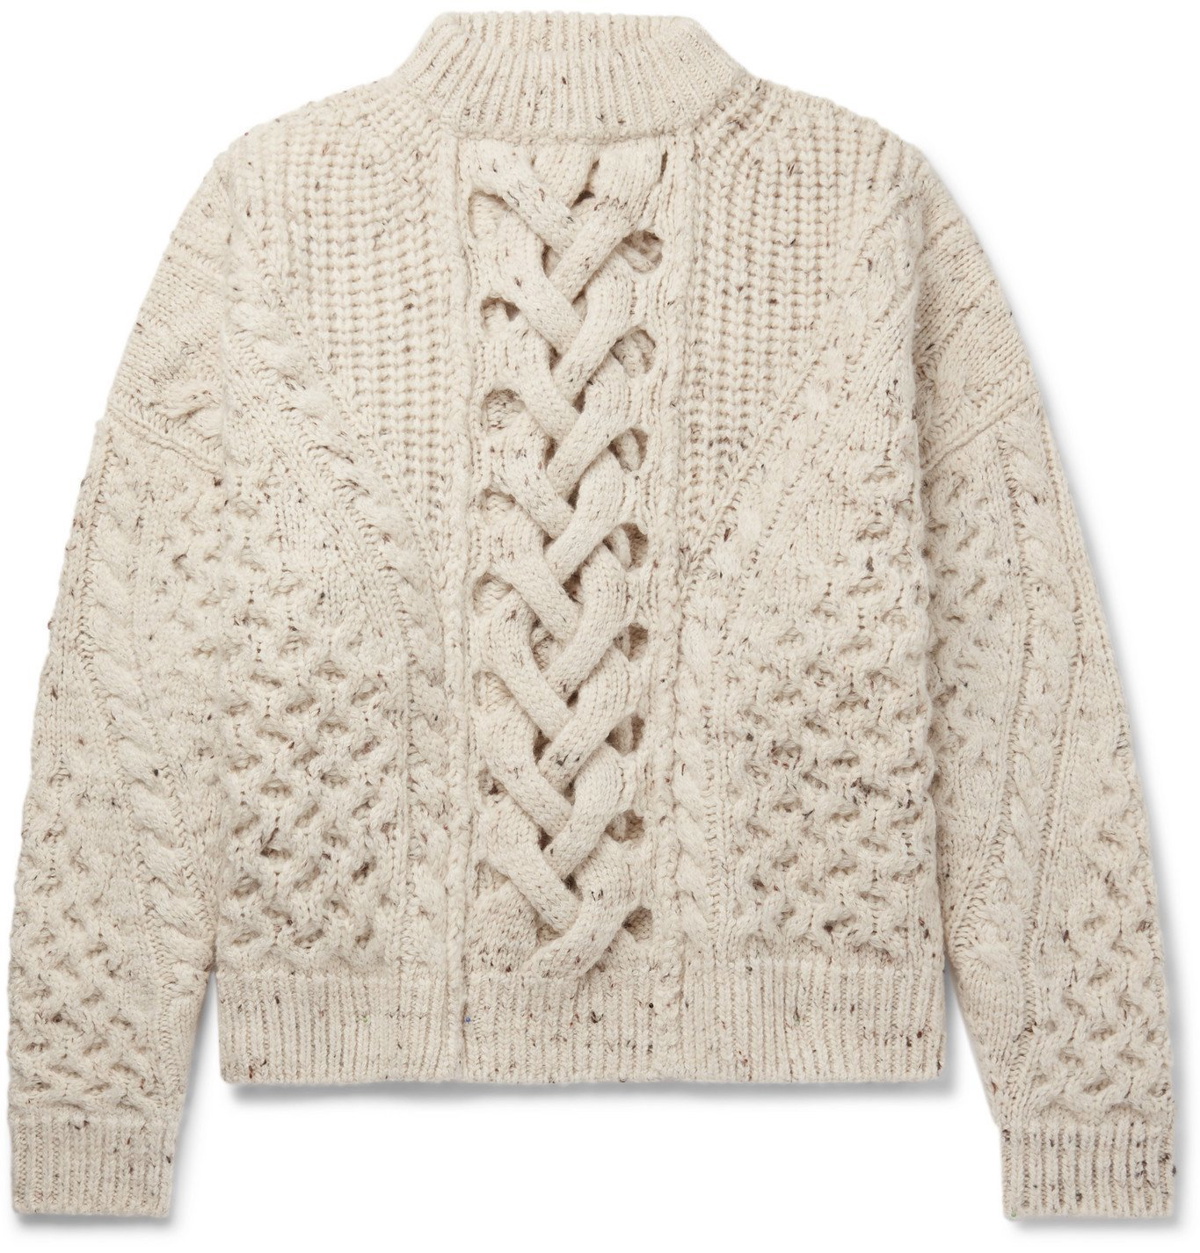 Isabel Marant - Jiarrenh Oversized Cable-Knit Sweater - Neutrals Isabel